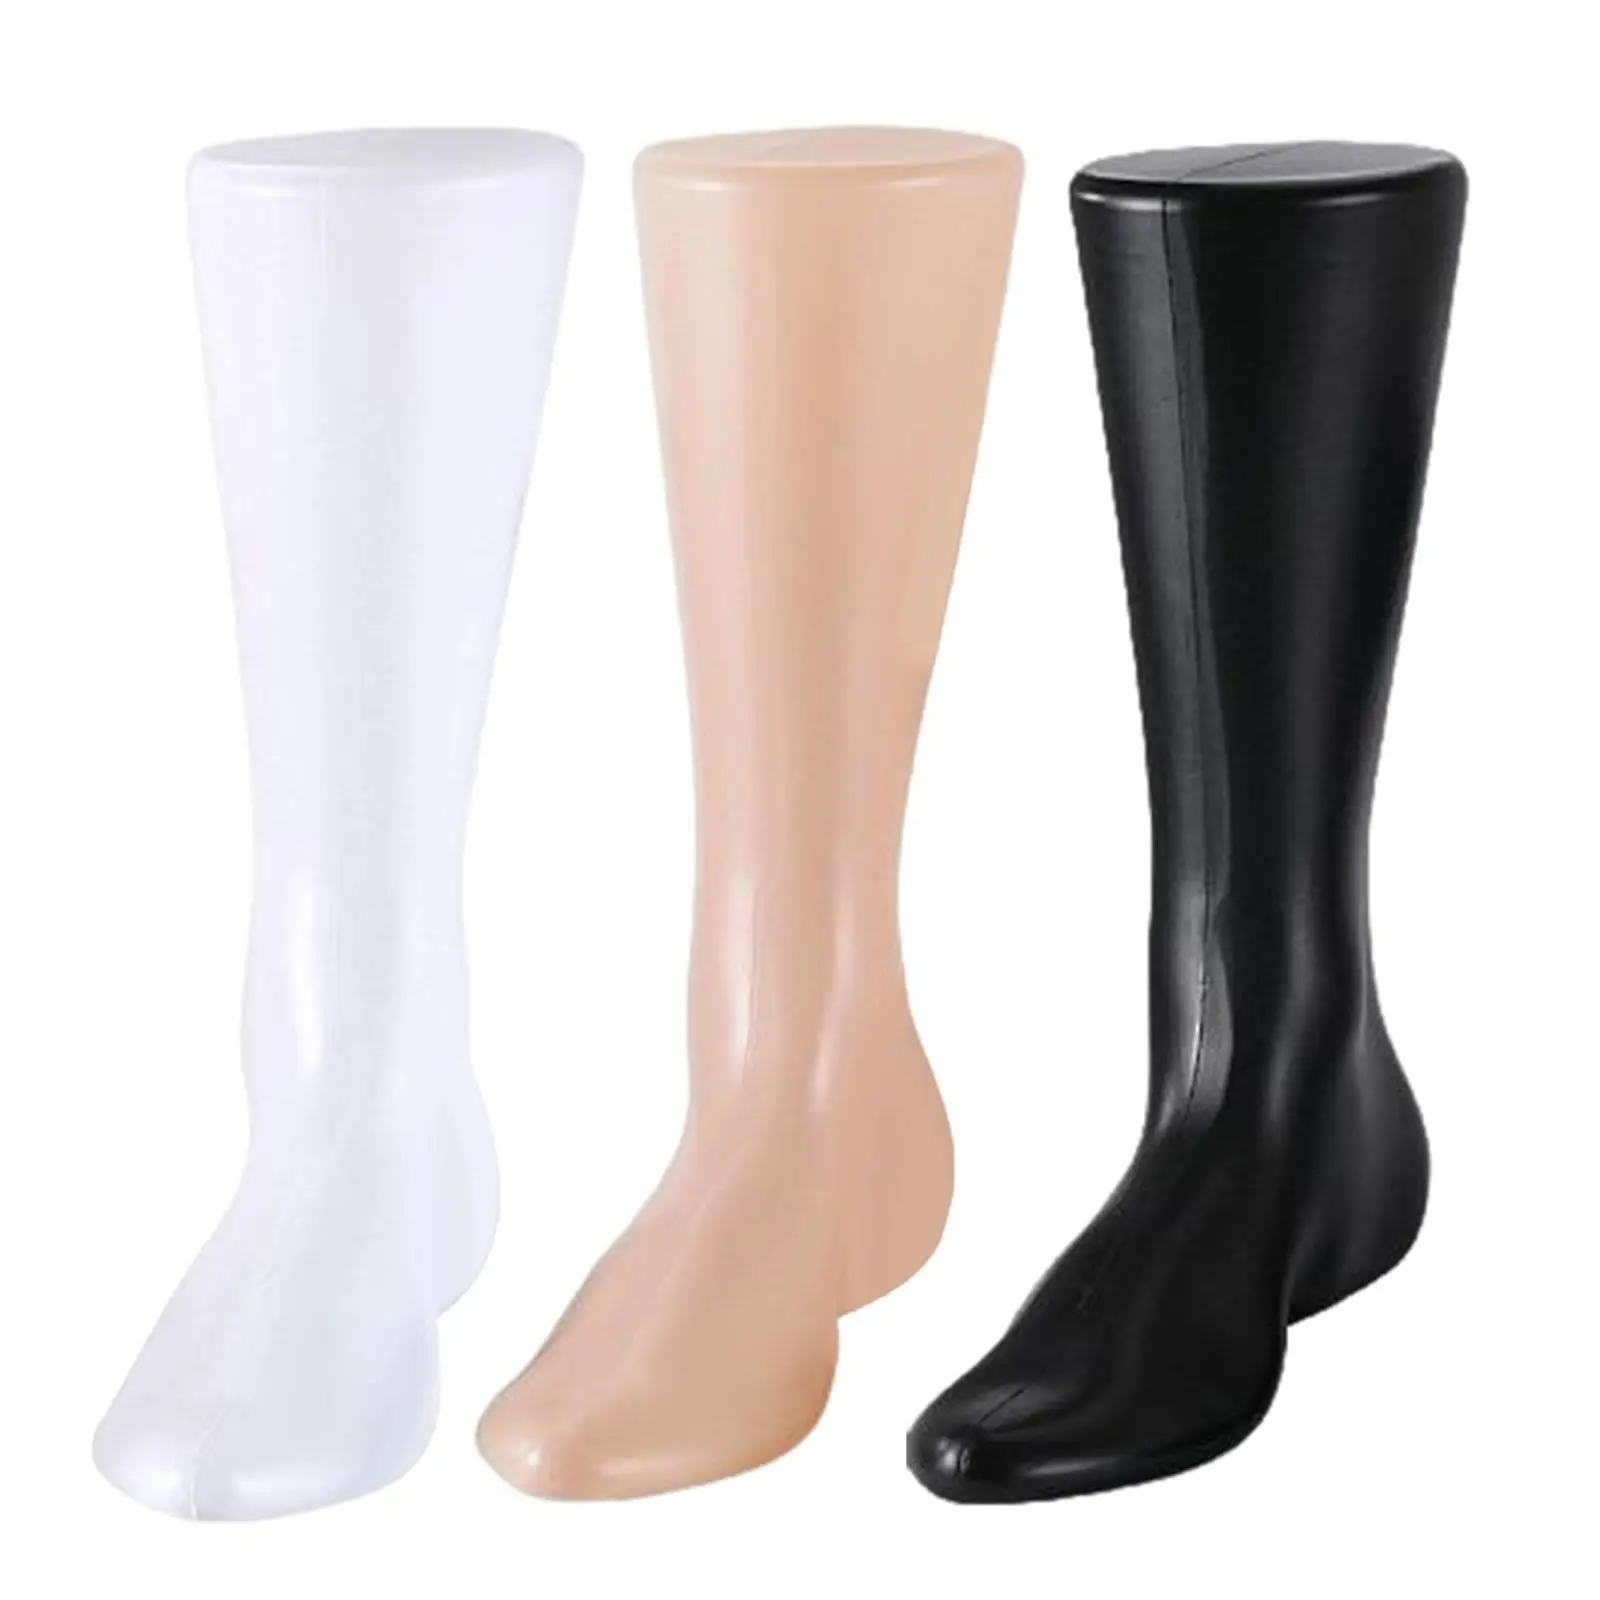 Male Mannequin Modeling Feet Shoes Support Foot Model for Home DIY Supplies